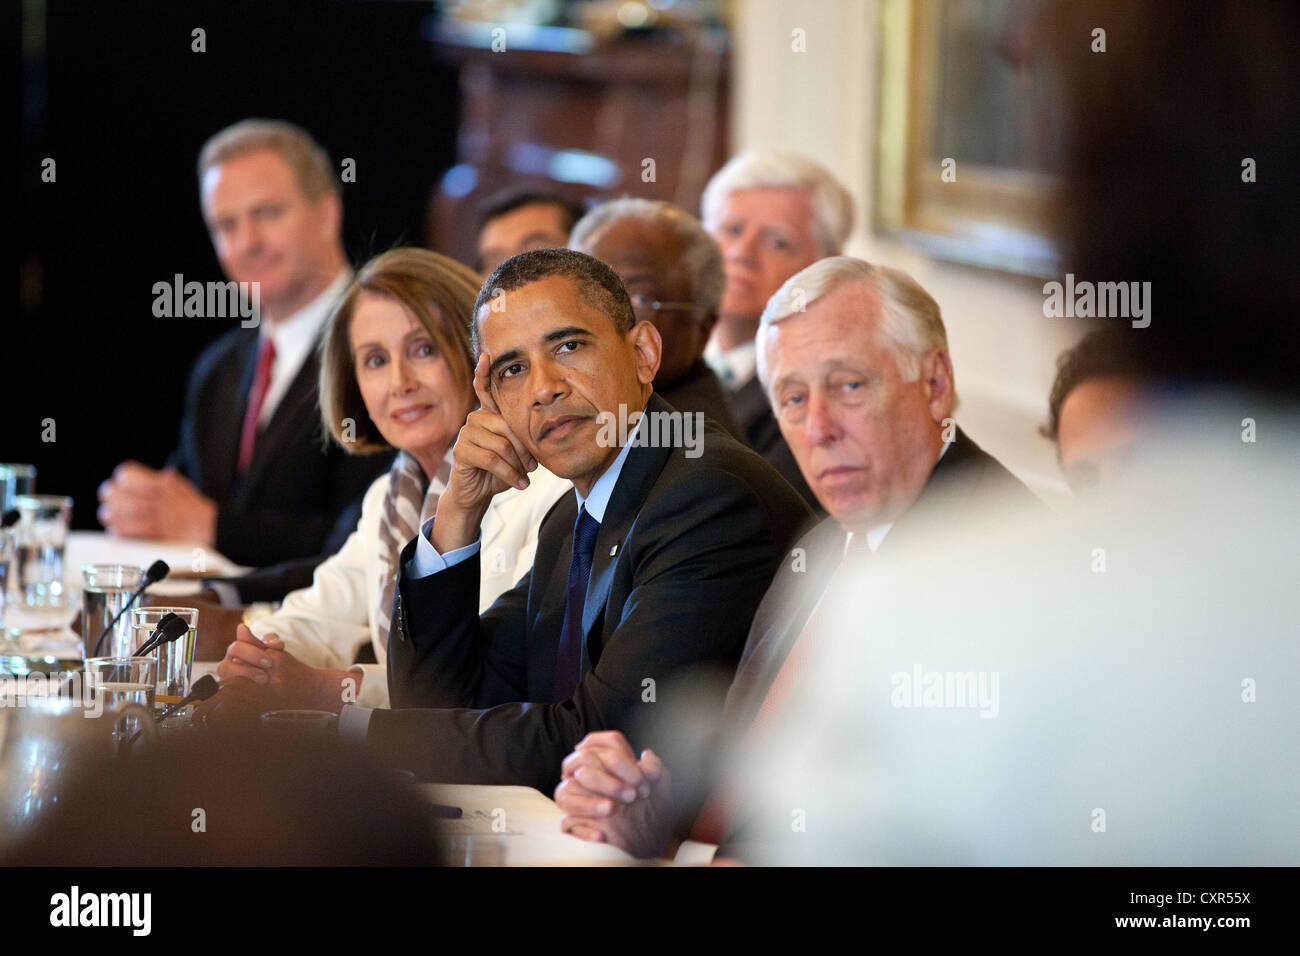 US President Barack Obama meets with the Democratic House Caucus June 2, 2011 in the East Room of the White House. Flanking the President are Minority Leader Nancy Pelosi, left, and Rep. Steny Hoyer, Minority Whip. Stock Photo